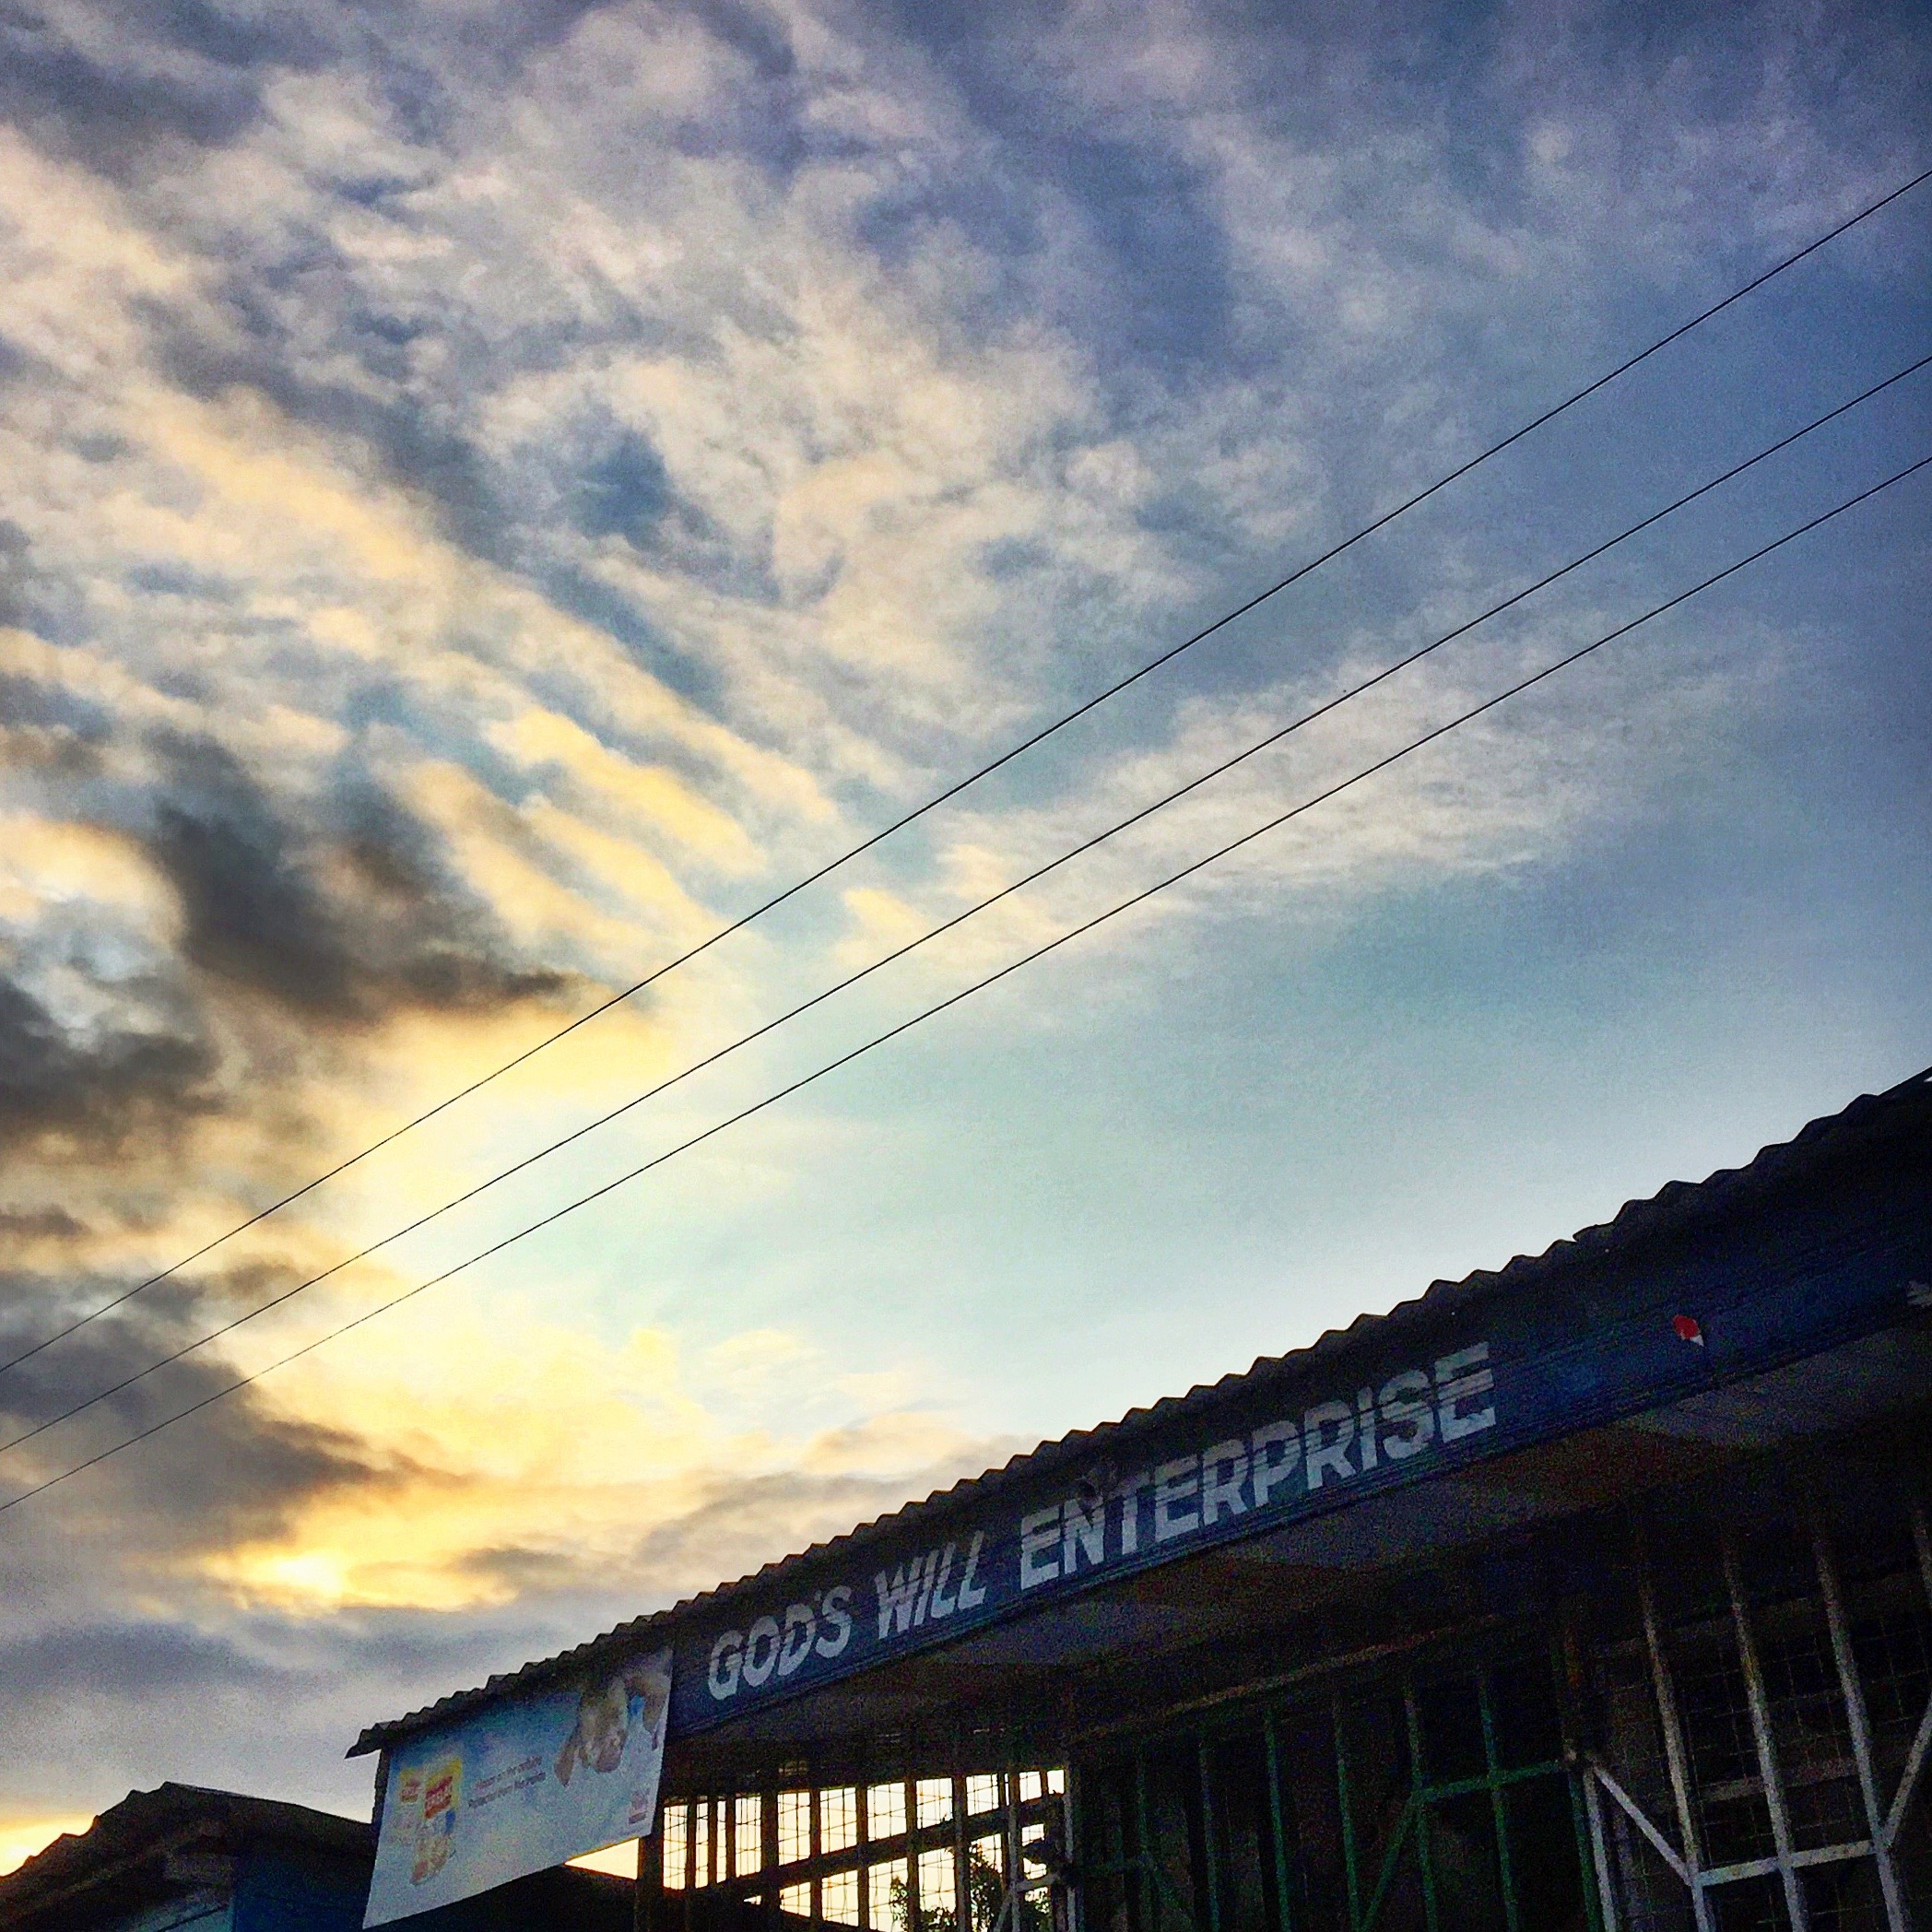 the sign for a shop called god's will enterprise in front of a sunset